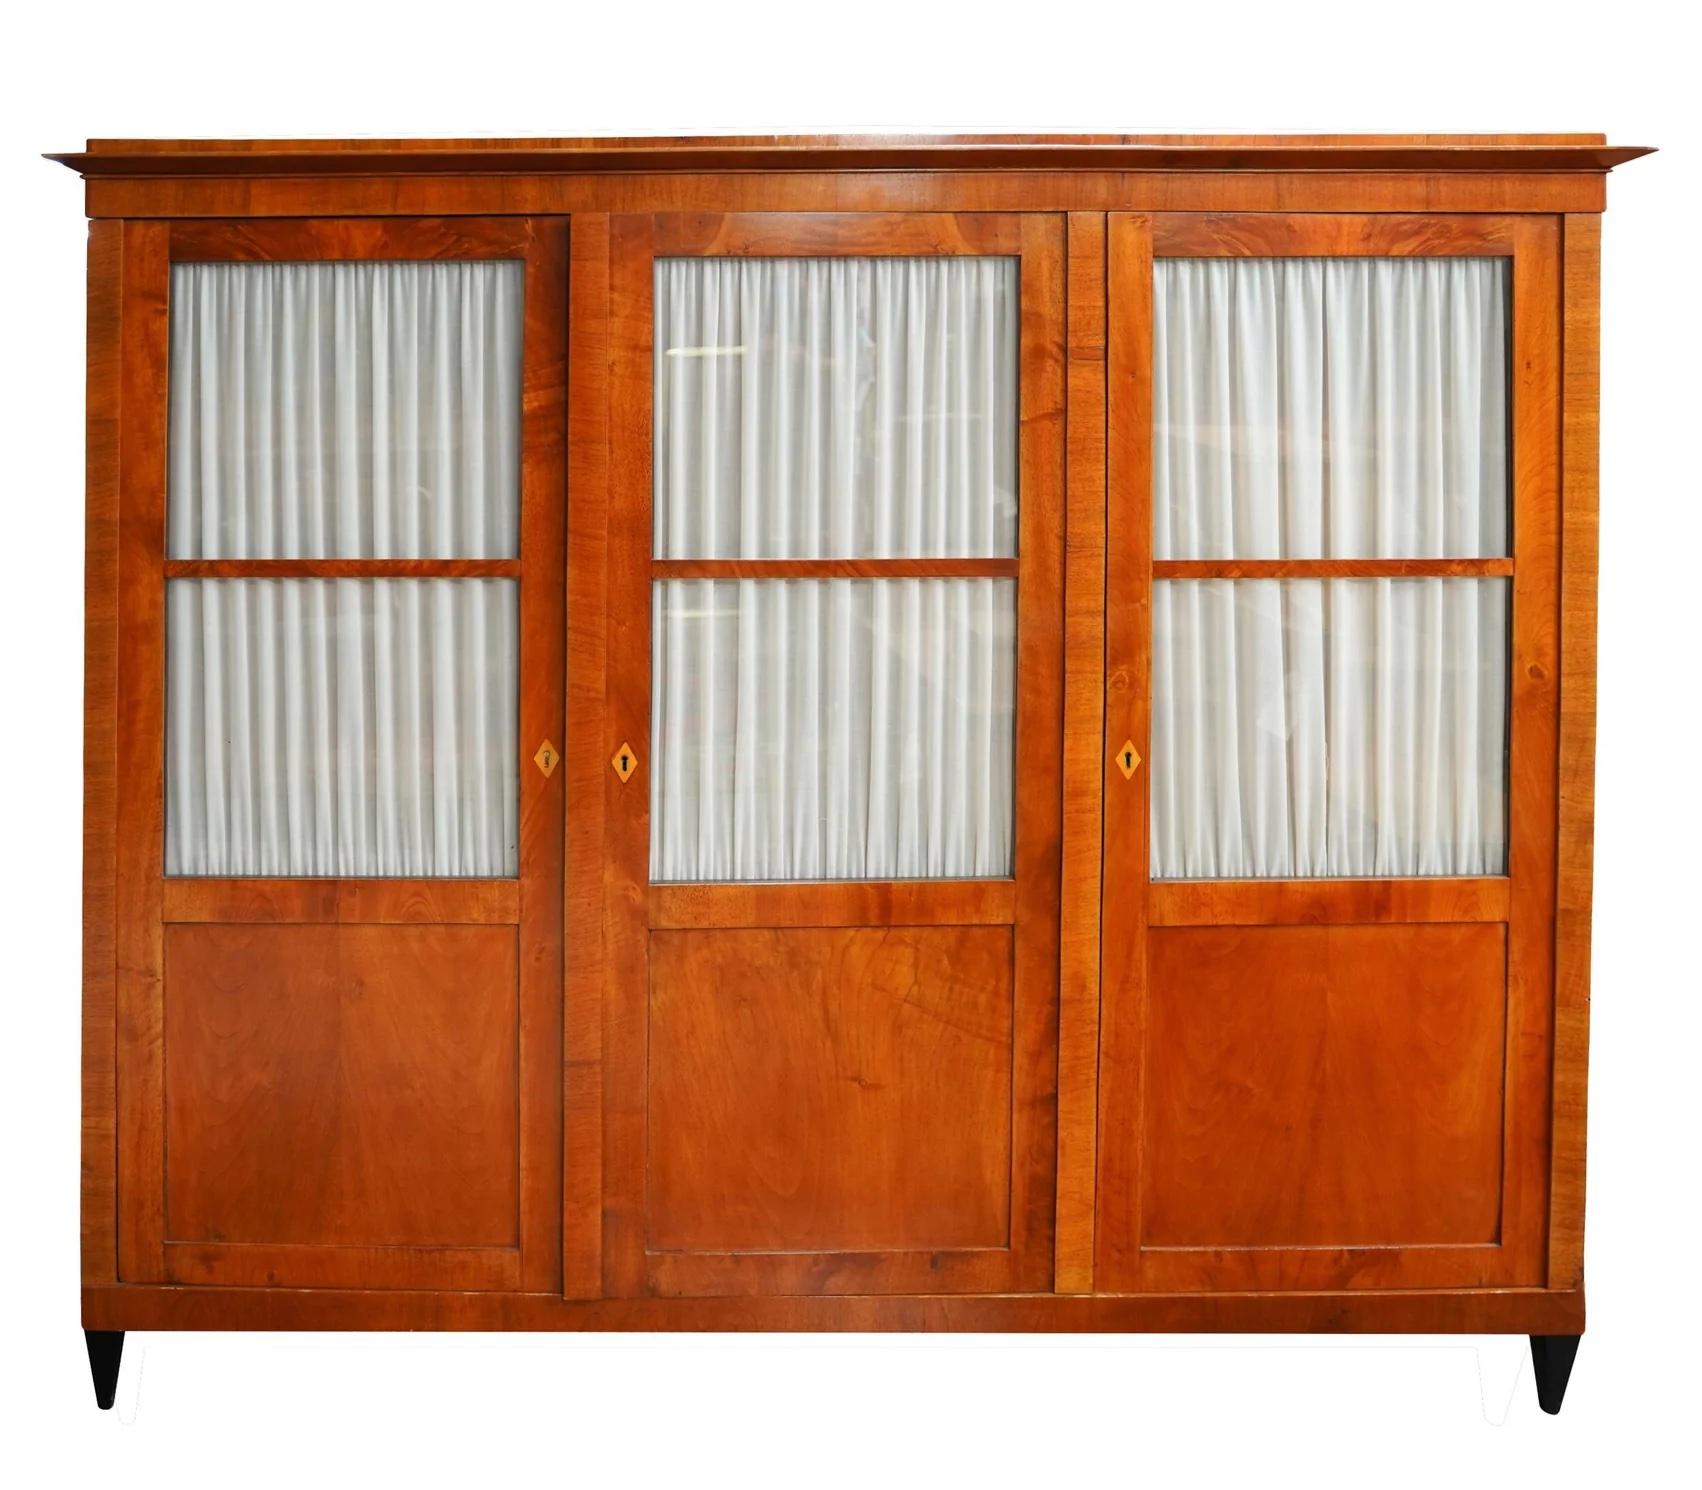 Period Antique Early 19th Century (Circa 1820) Fruitwood German Biedermeier Three Door Glazed Cabinet Rising on Four Ebonized Tapered Legs. The three divided lite glazed doors with privacy curtains open to 3 vertical compartments with removable,